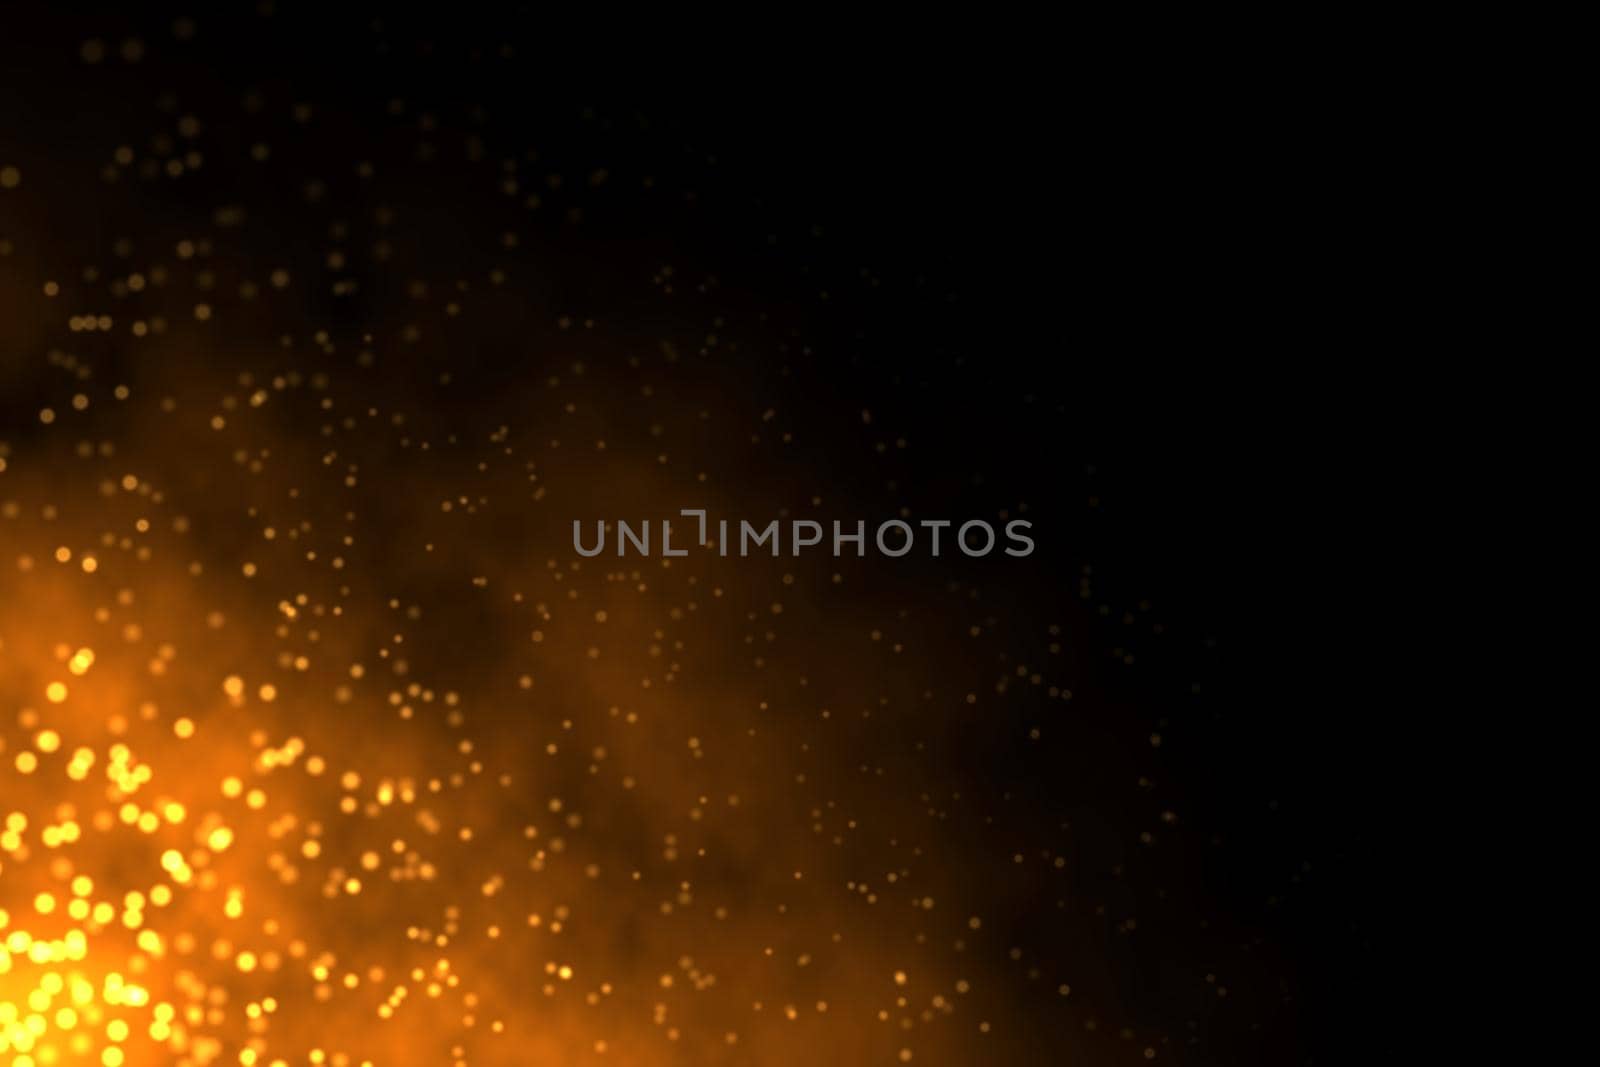 Abstract illustration of sparkling burning fire on dark black background with copy space on right side.